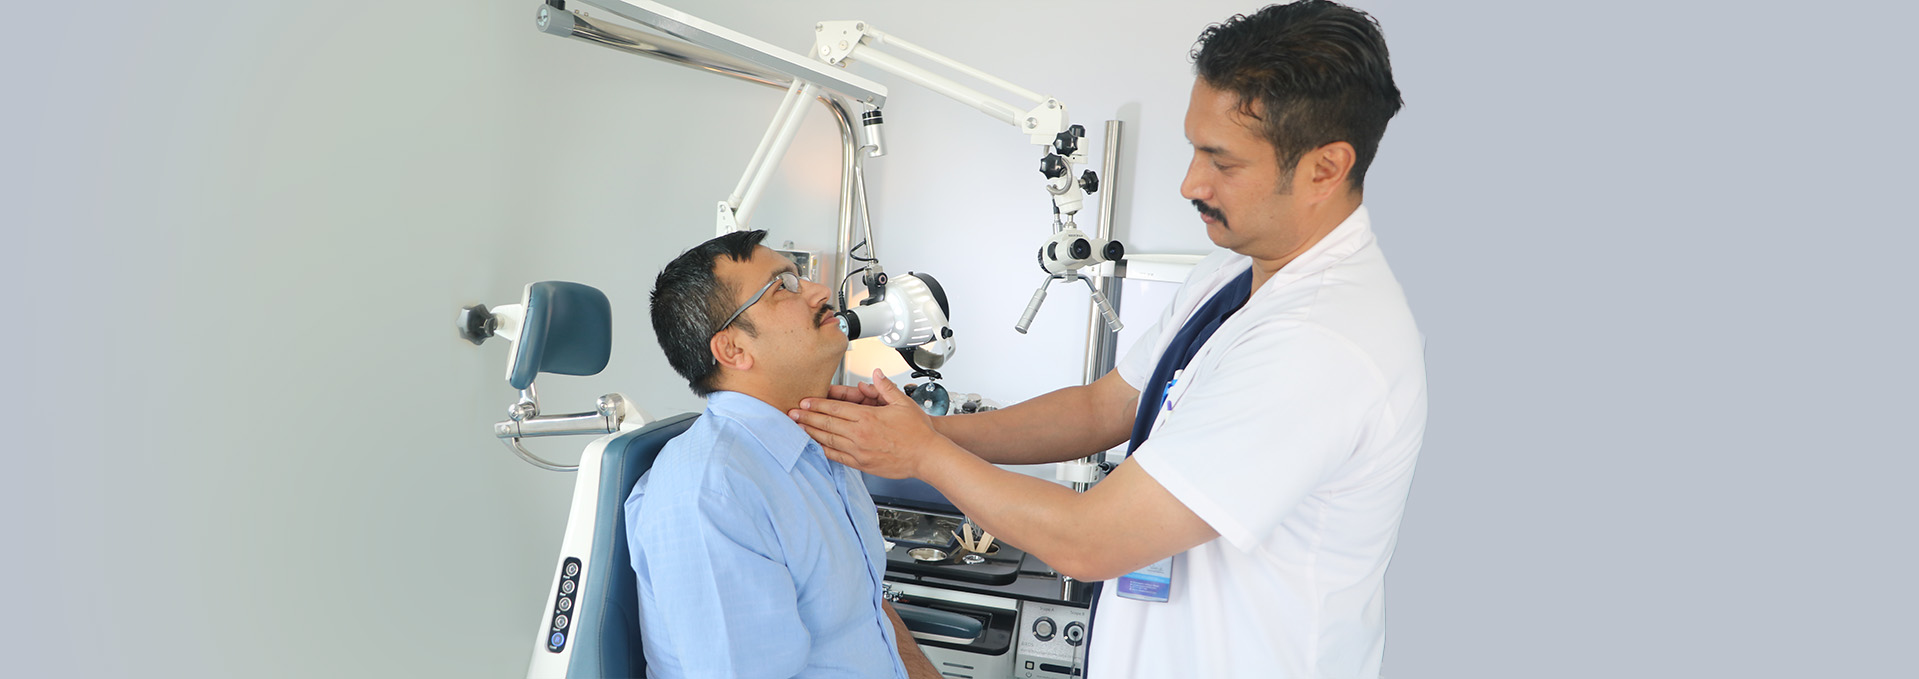 Nasal OPD Endoscopy Services and OPD based Procedures